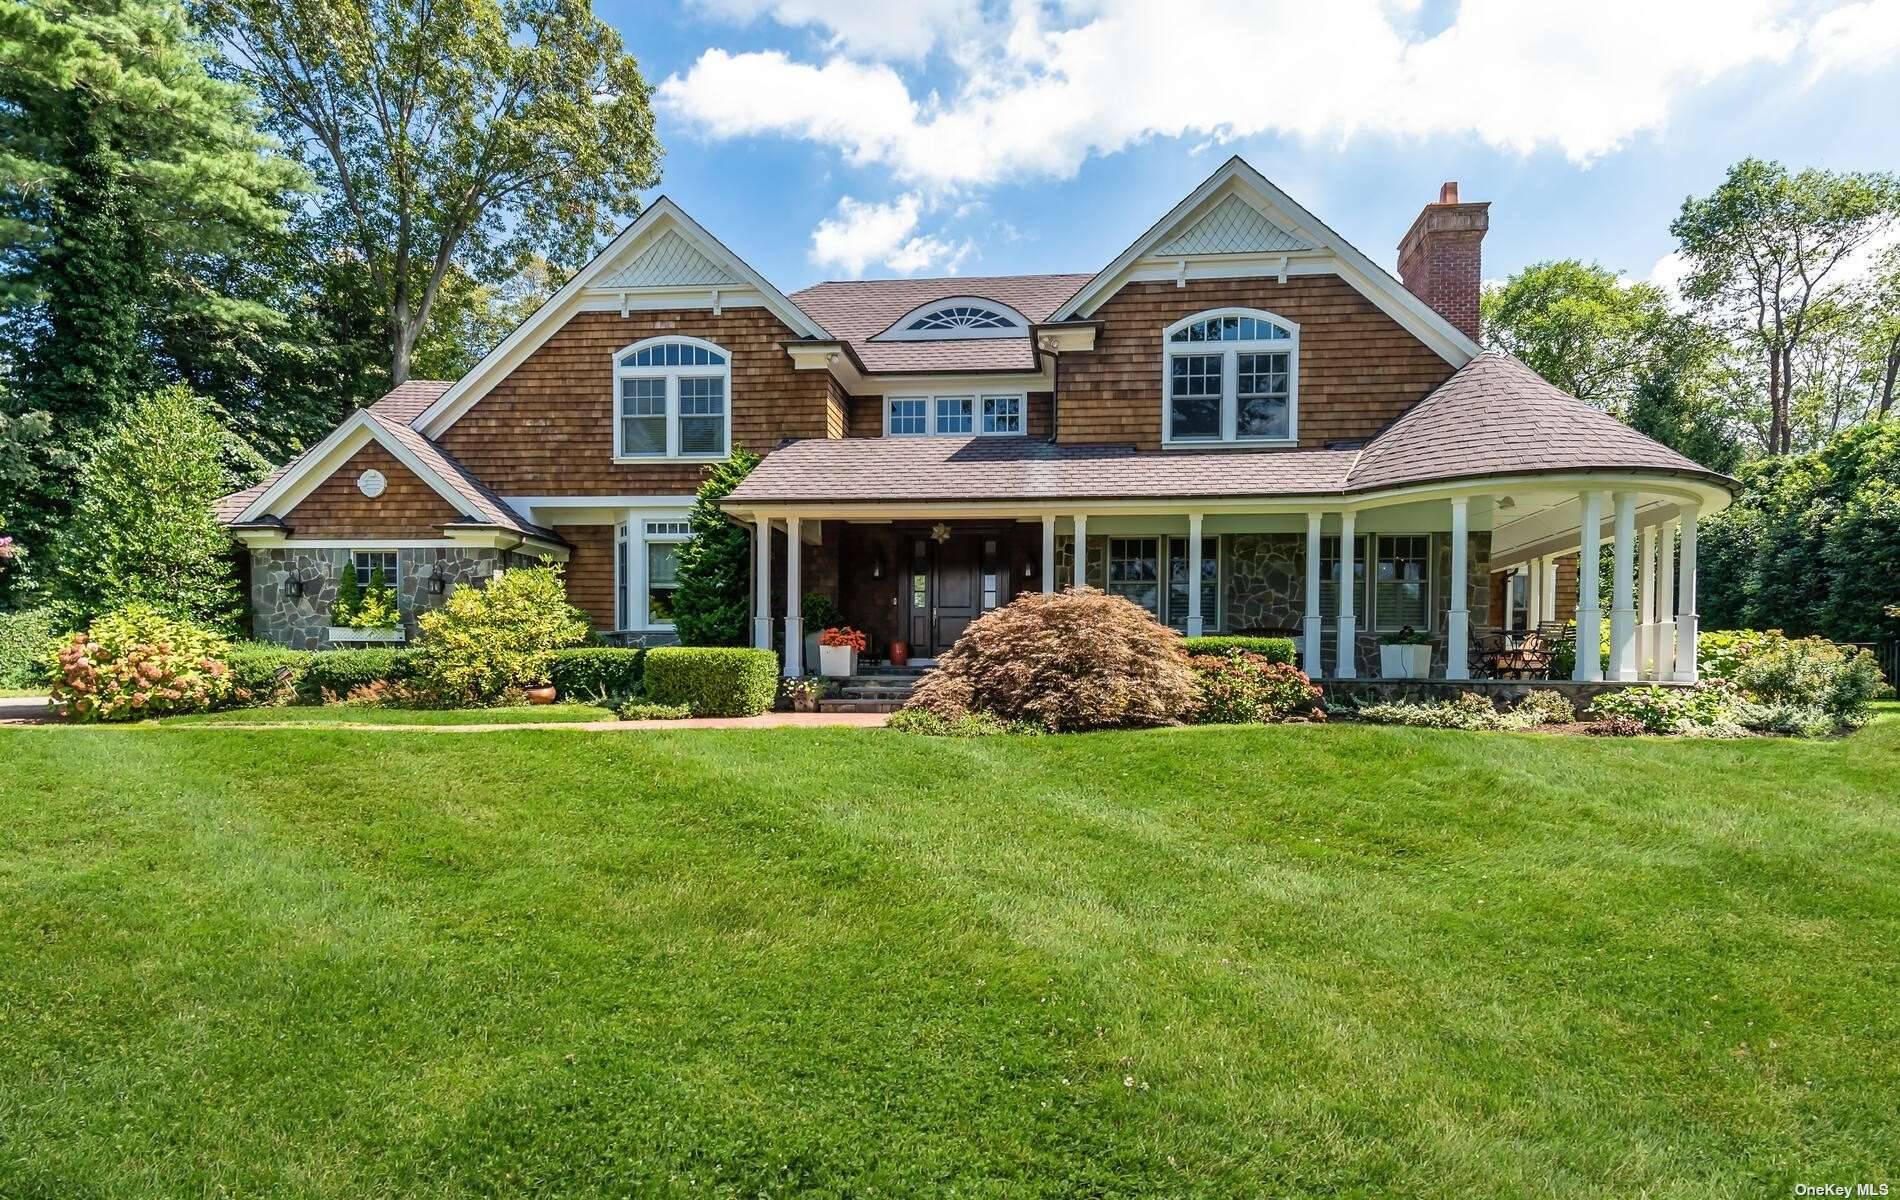 Exceptional 5 Star Quality Hampton Style Colonial on 3 4 acre Pristine Designer landscaped property.